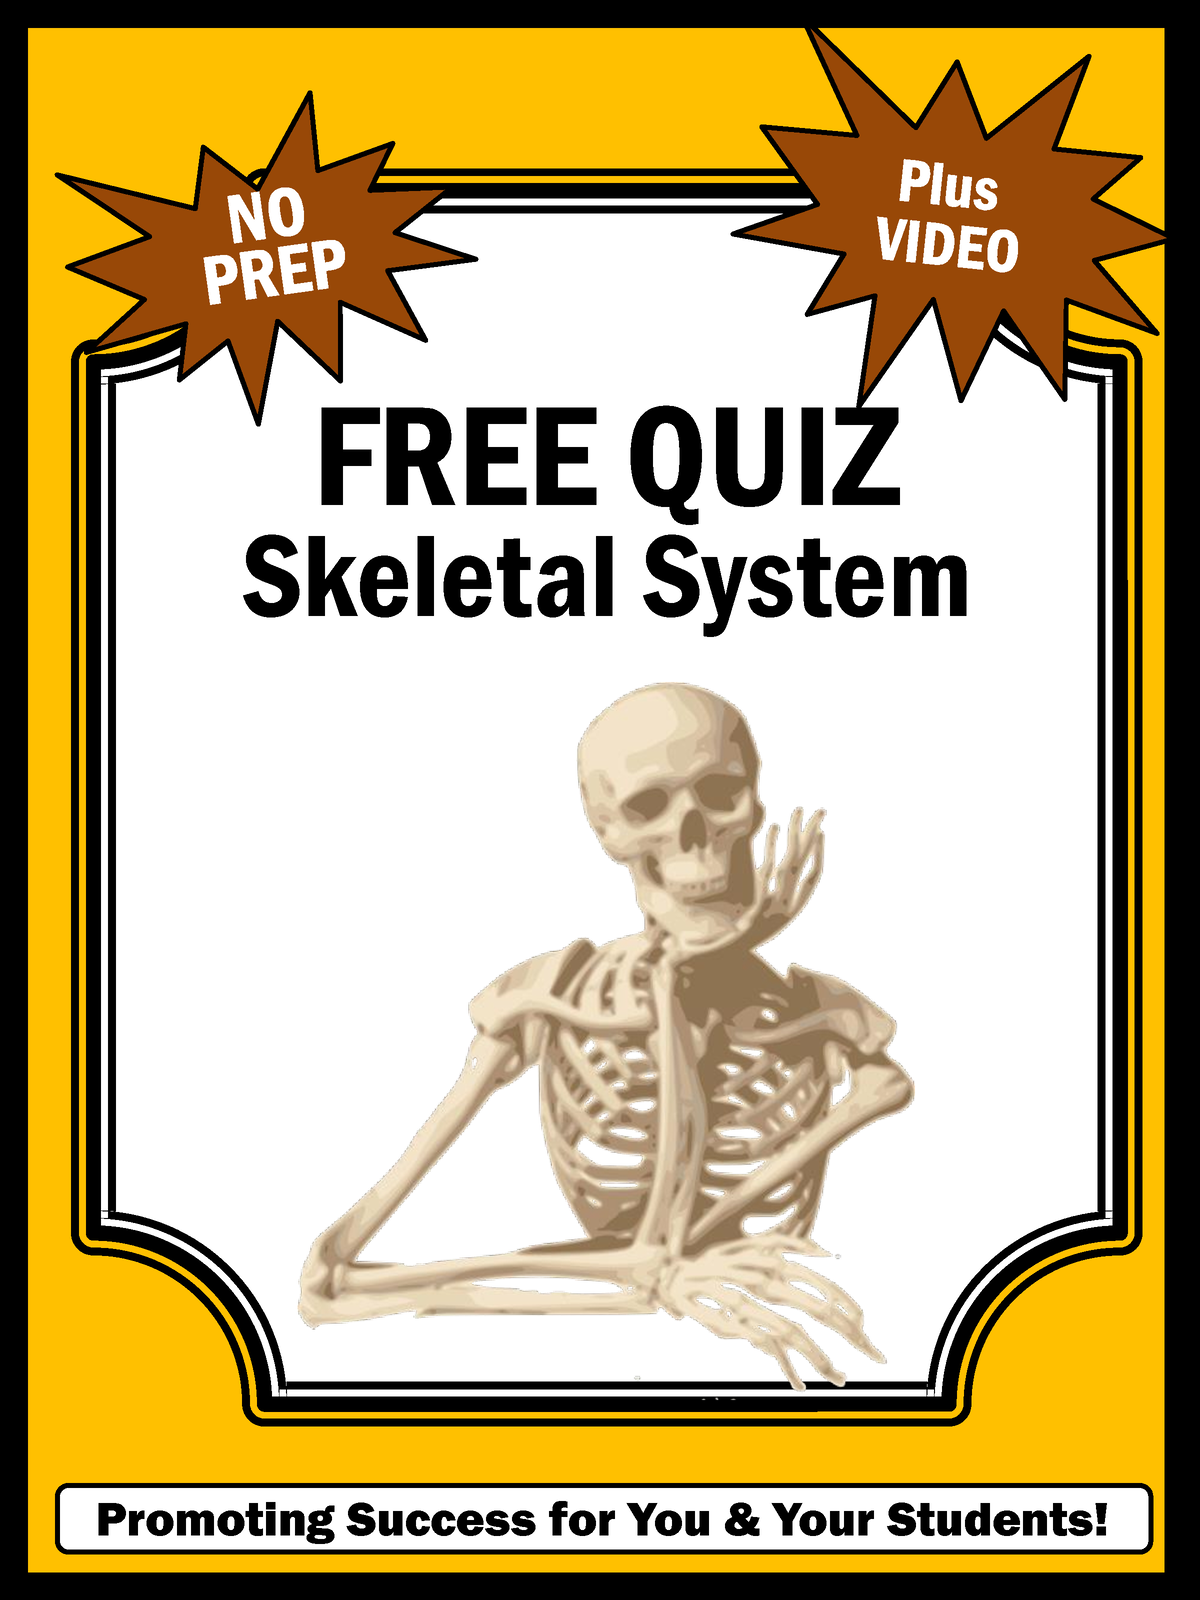 Human skeleton, Parts, Functions, Diagram, & Facts